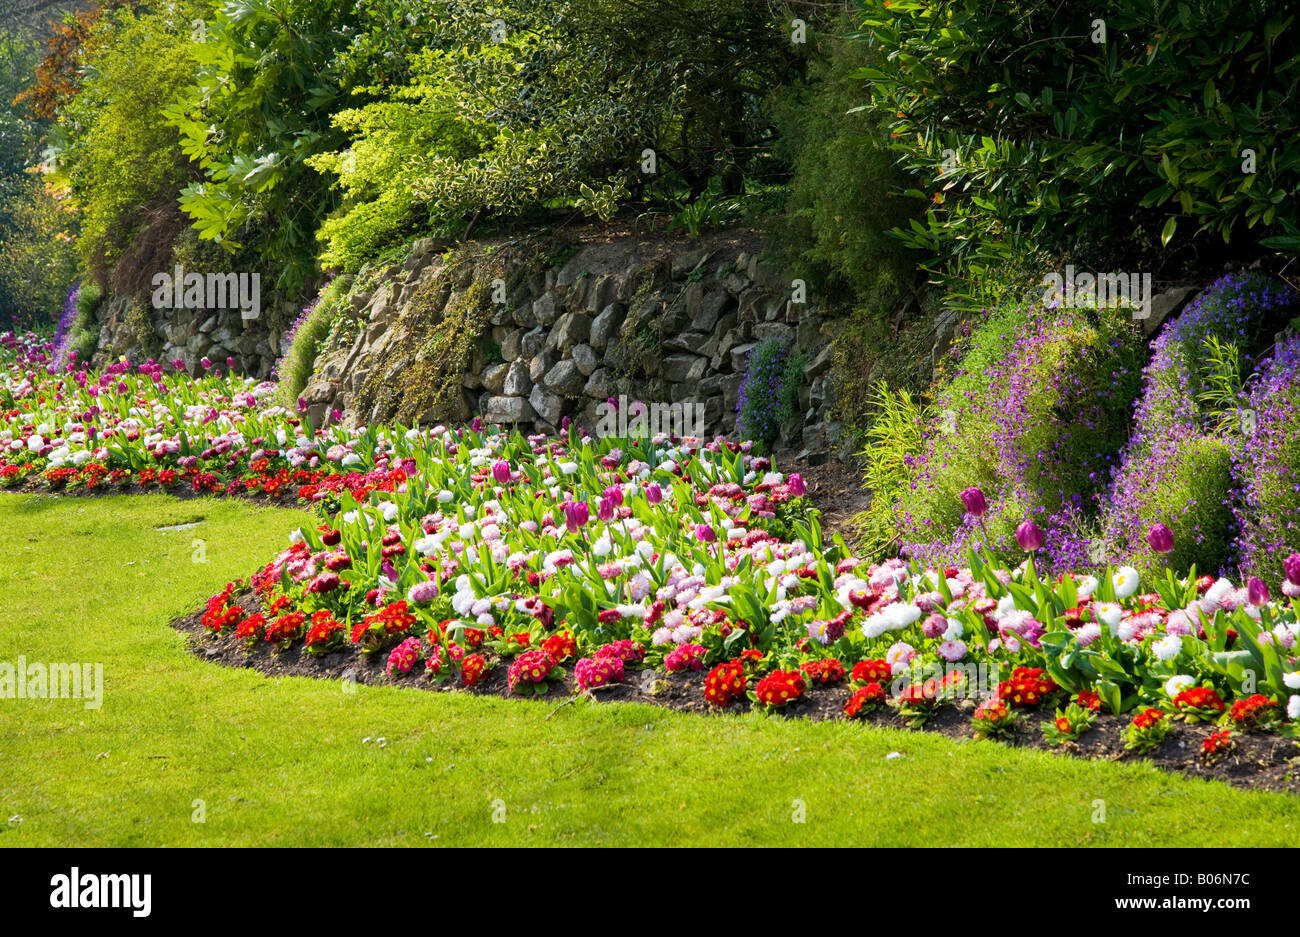 Wavy border of spring tulips and bellis perennis daisies taken at the Town Gardens, Swindon, Wiltshire, England, UK Stock Photo